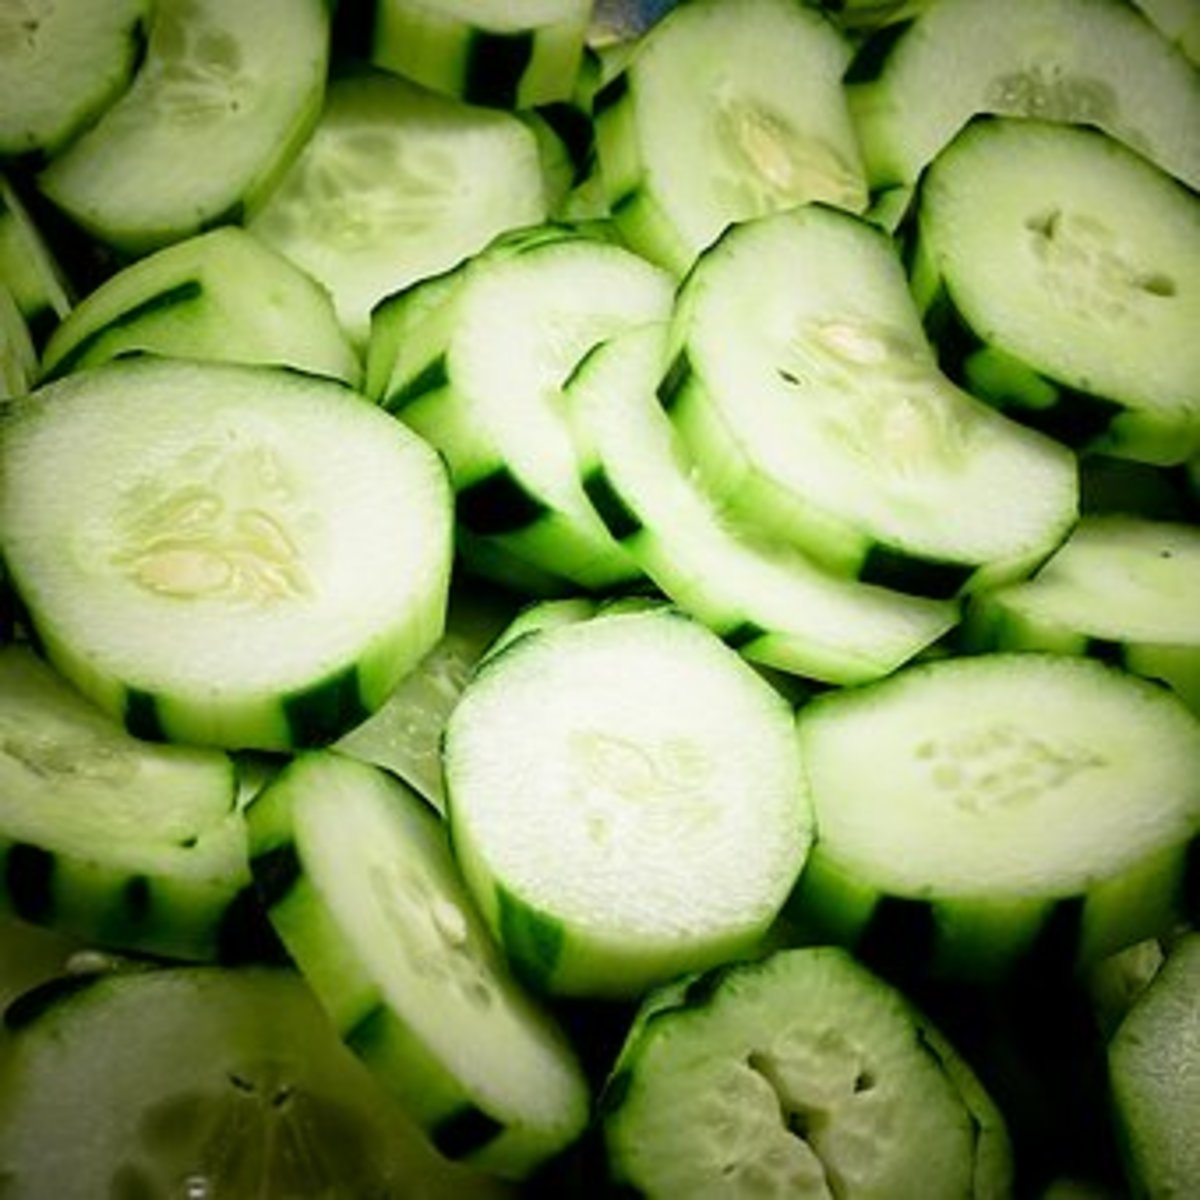 Placing cucumbers on your eyes and relaxing for 20 minutes can help reduce puffiness.